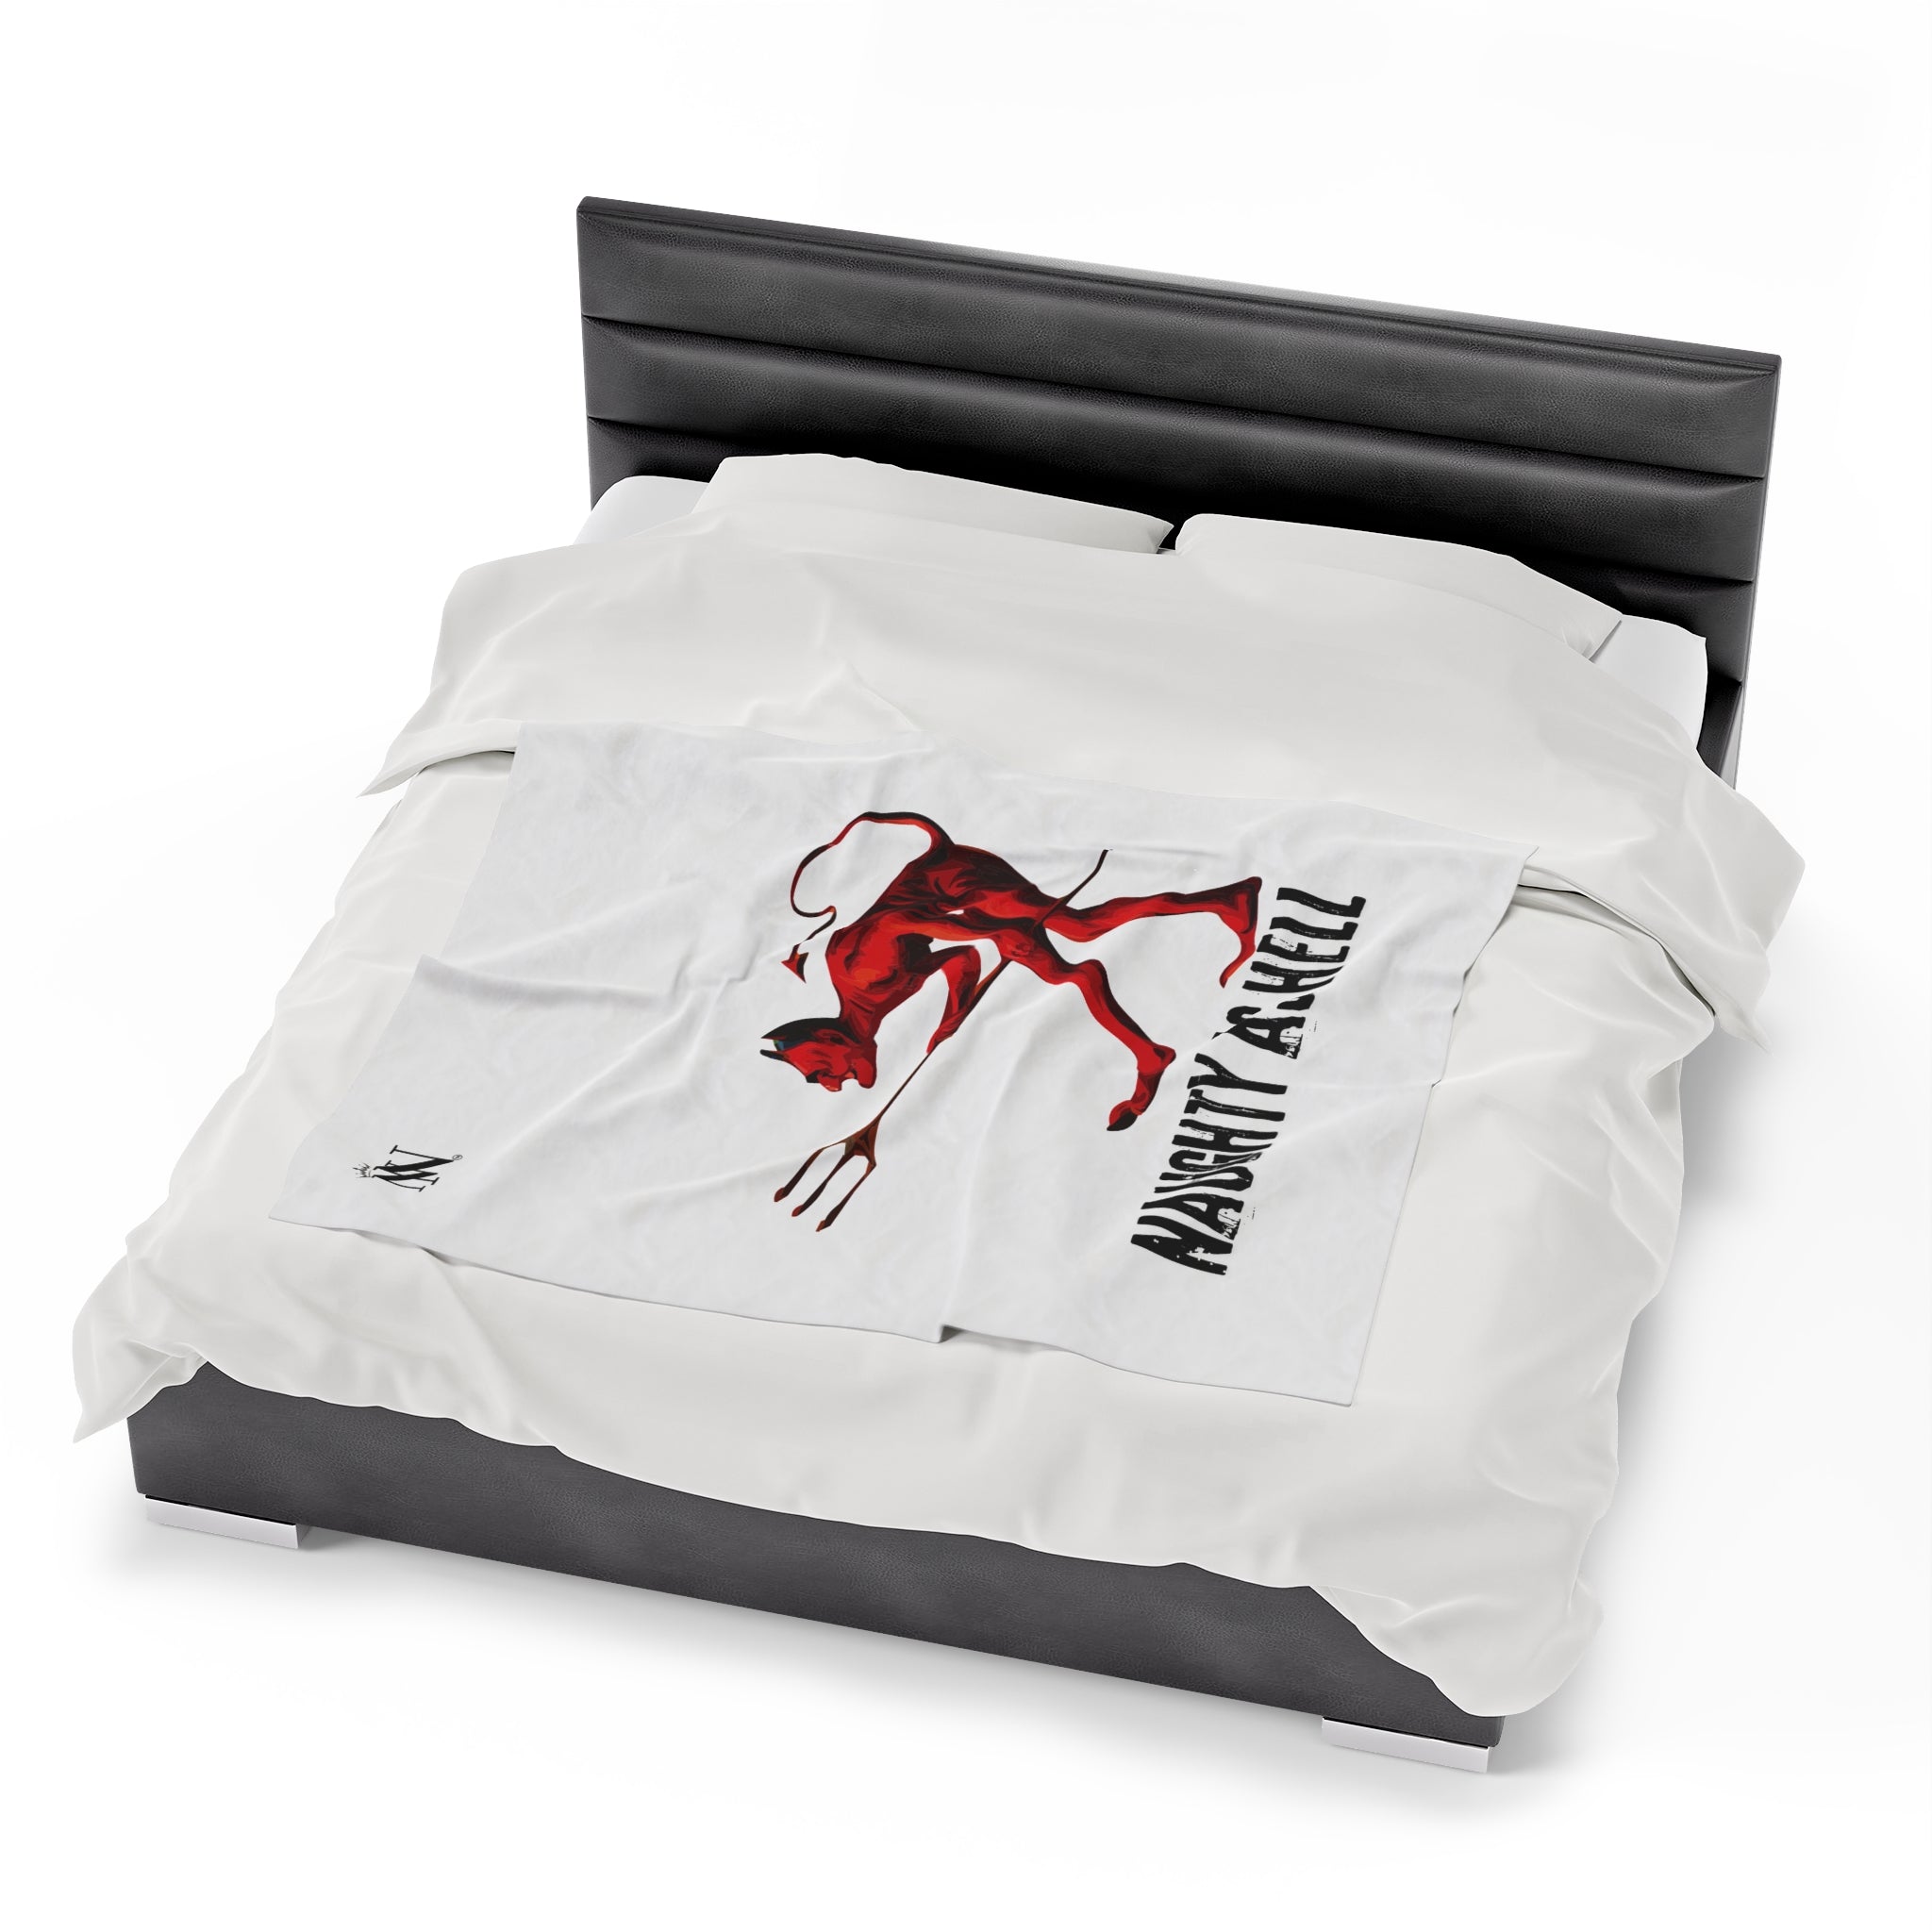 Naughty as hell sexual deviant blanket